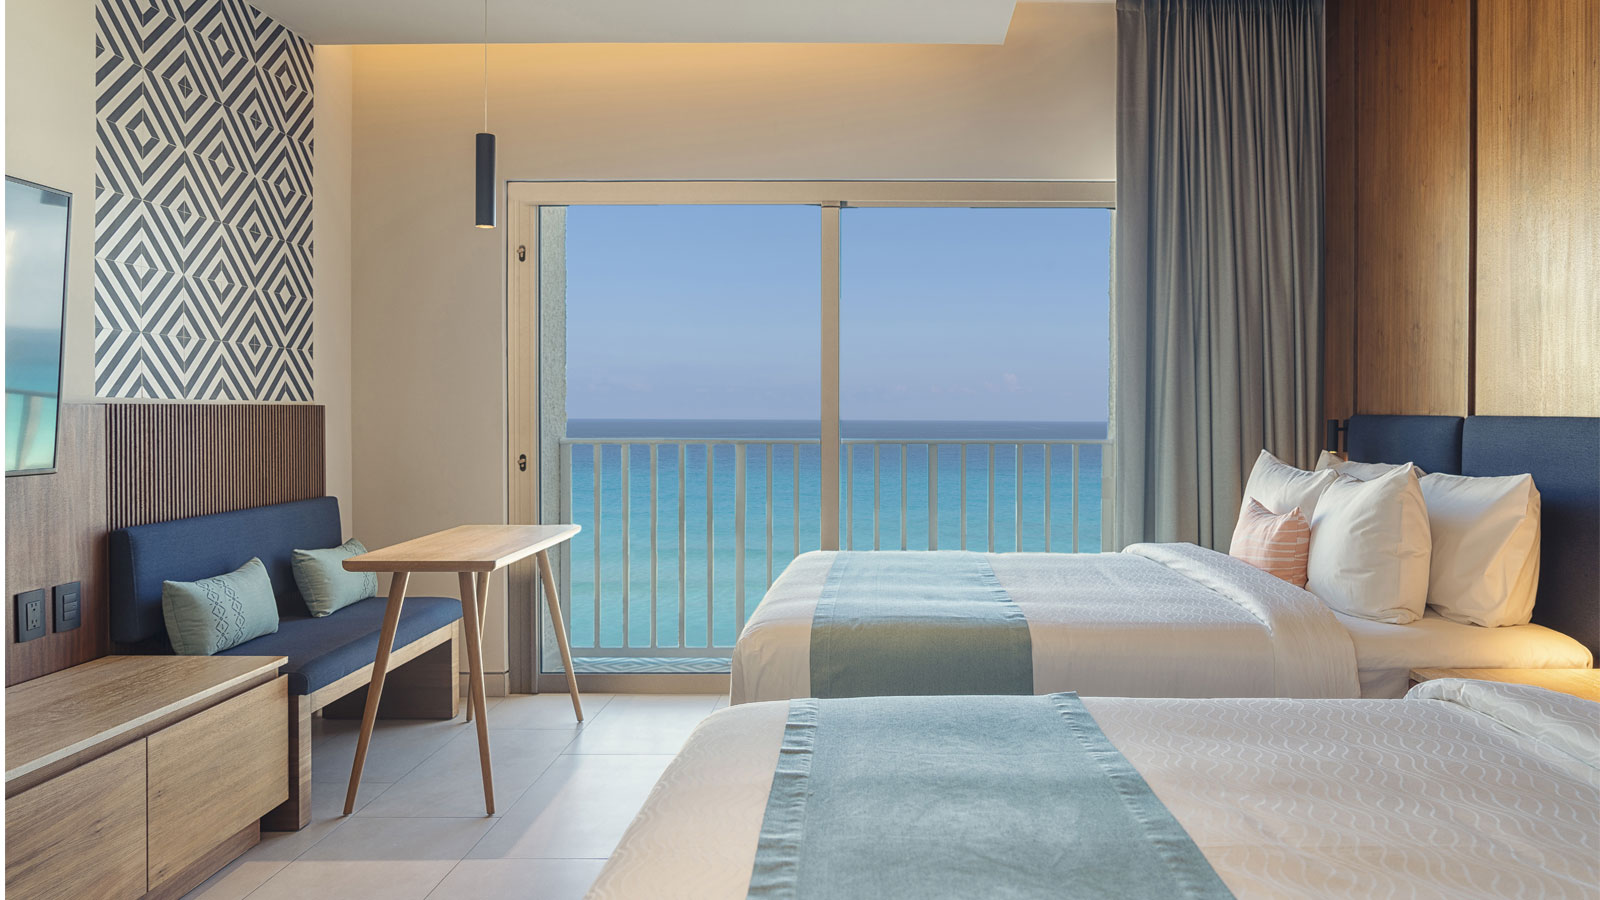 Hilton-Cancun-Mar-Caribe-All-Inclusive-Resort-Guest-Room-Double-Bed-Balcony-Beachfront